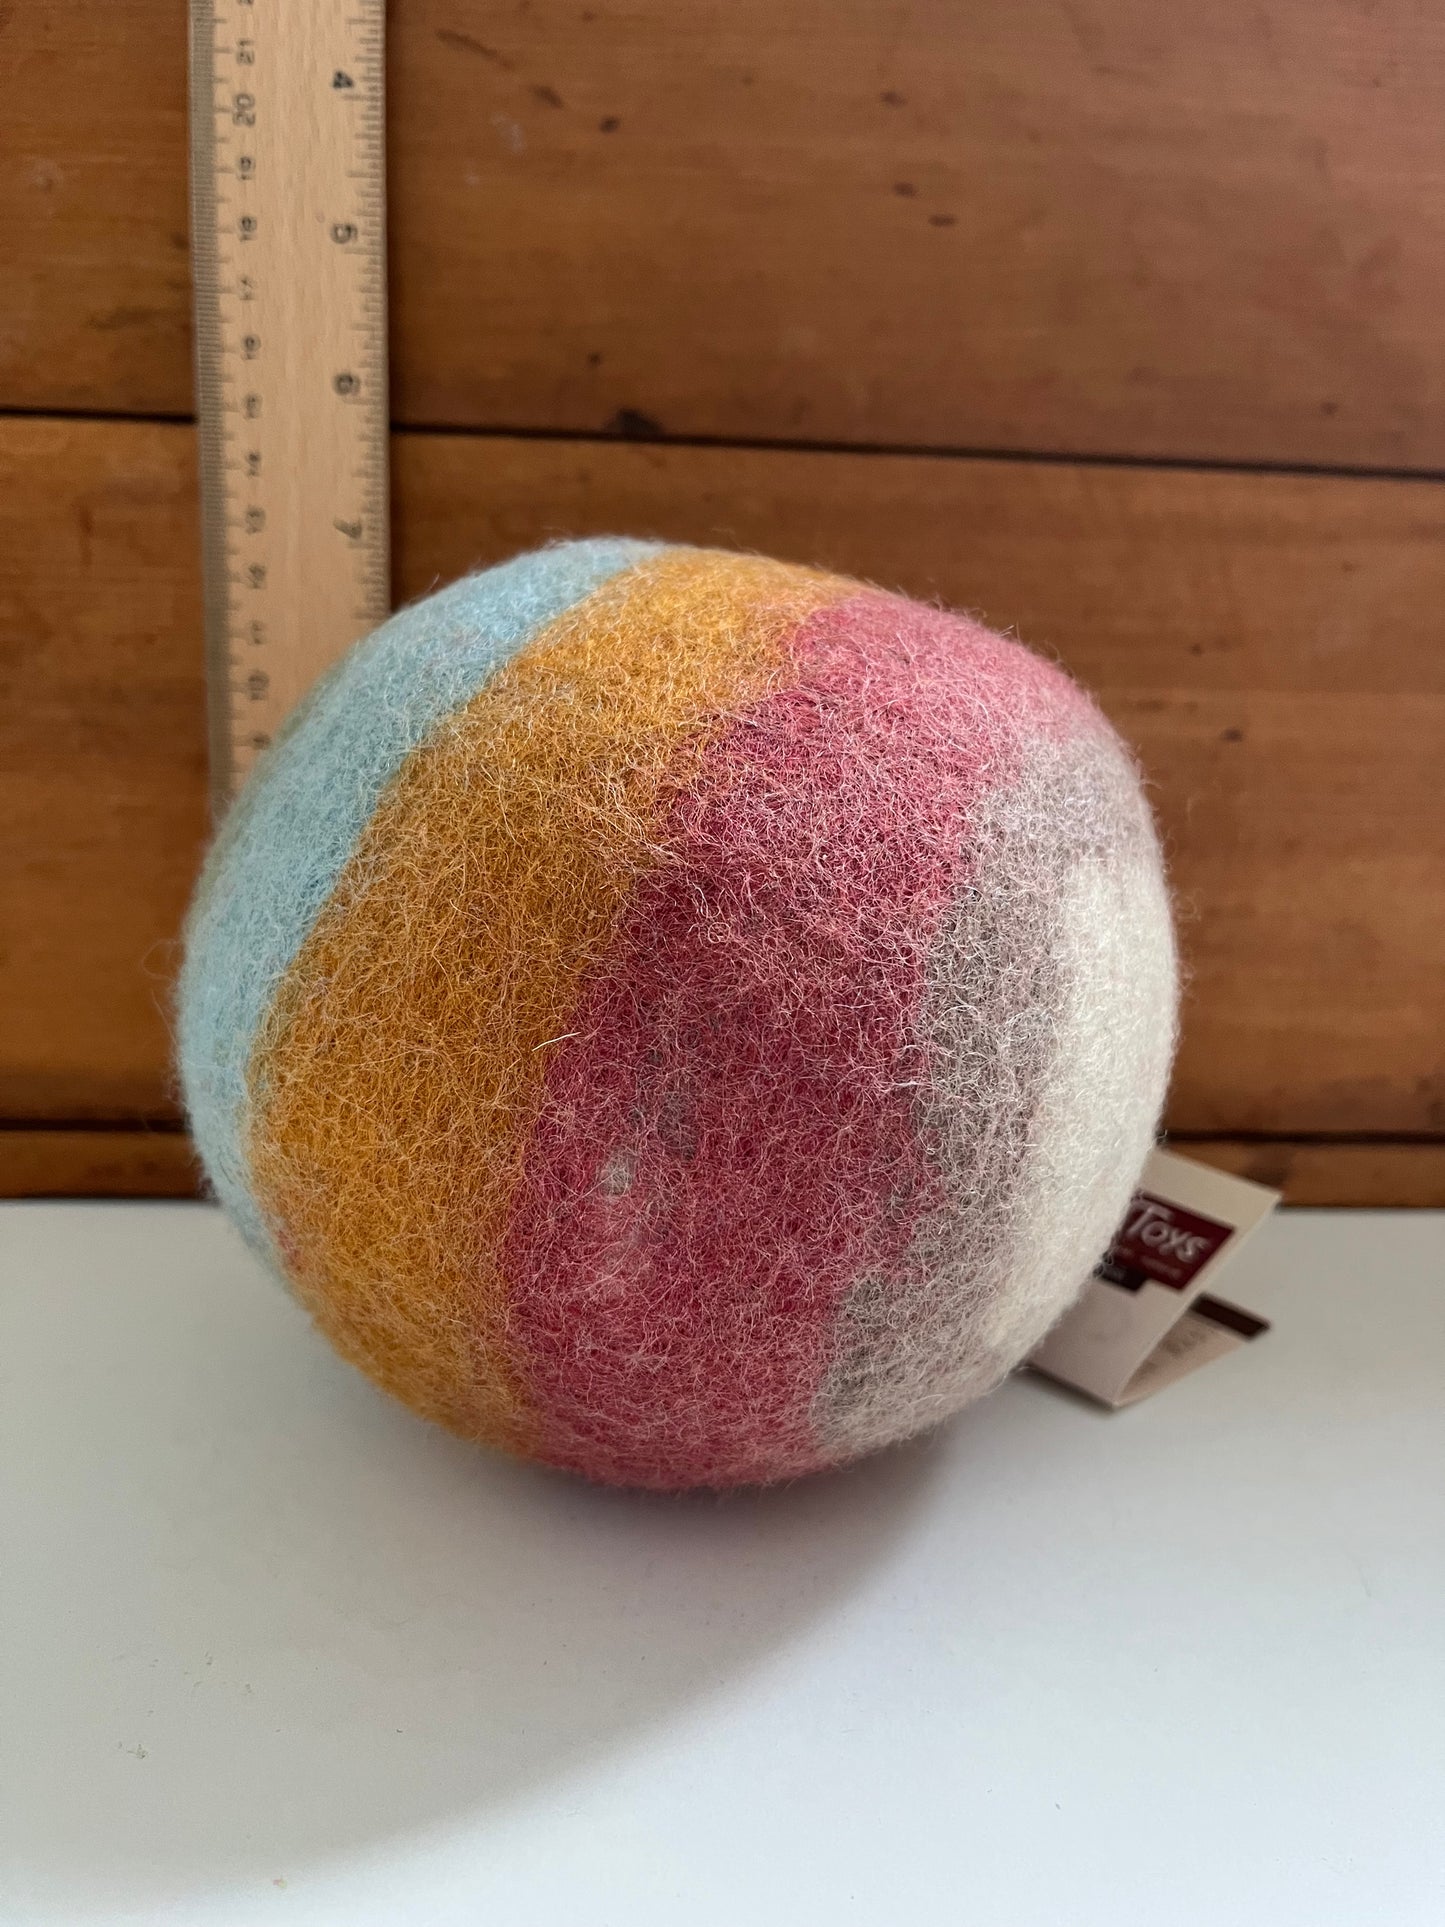 Soft Felted Toy - LARGE EARTH BALL!!…Soccer inside 😊